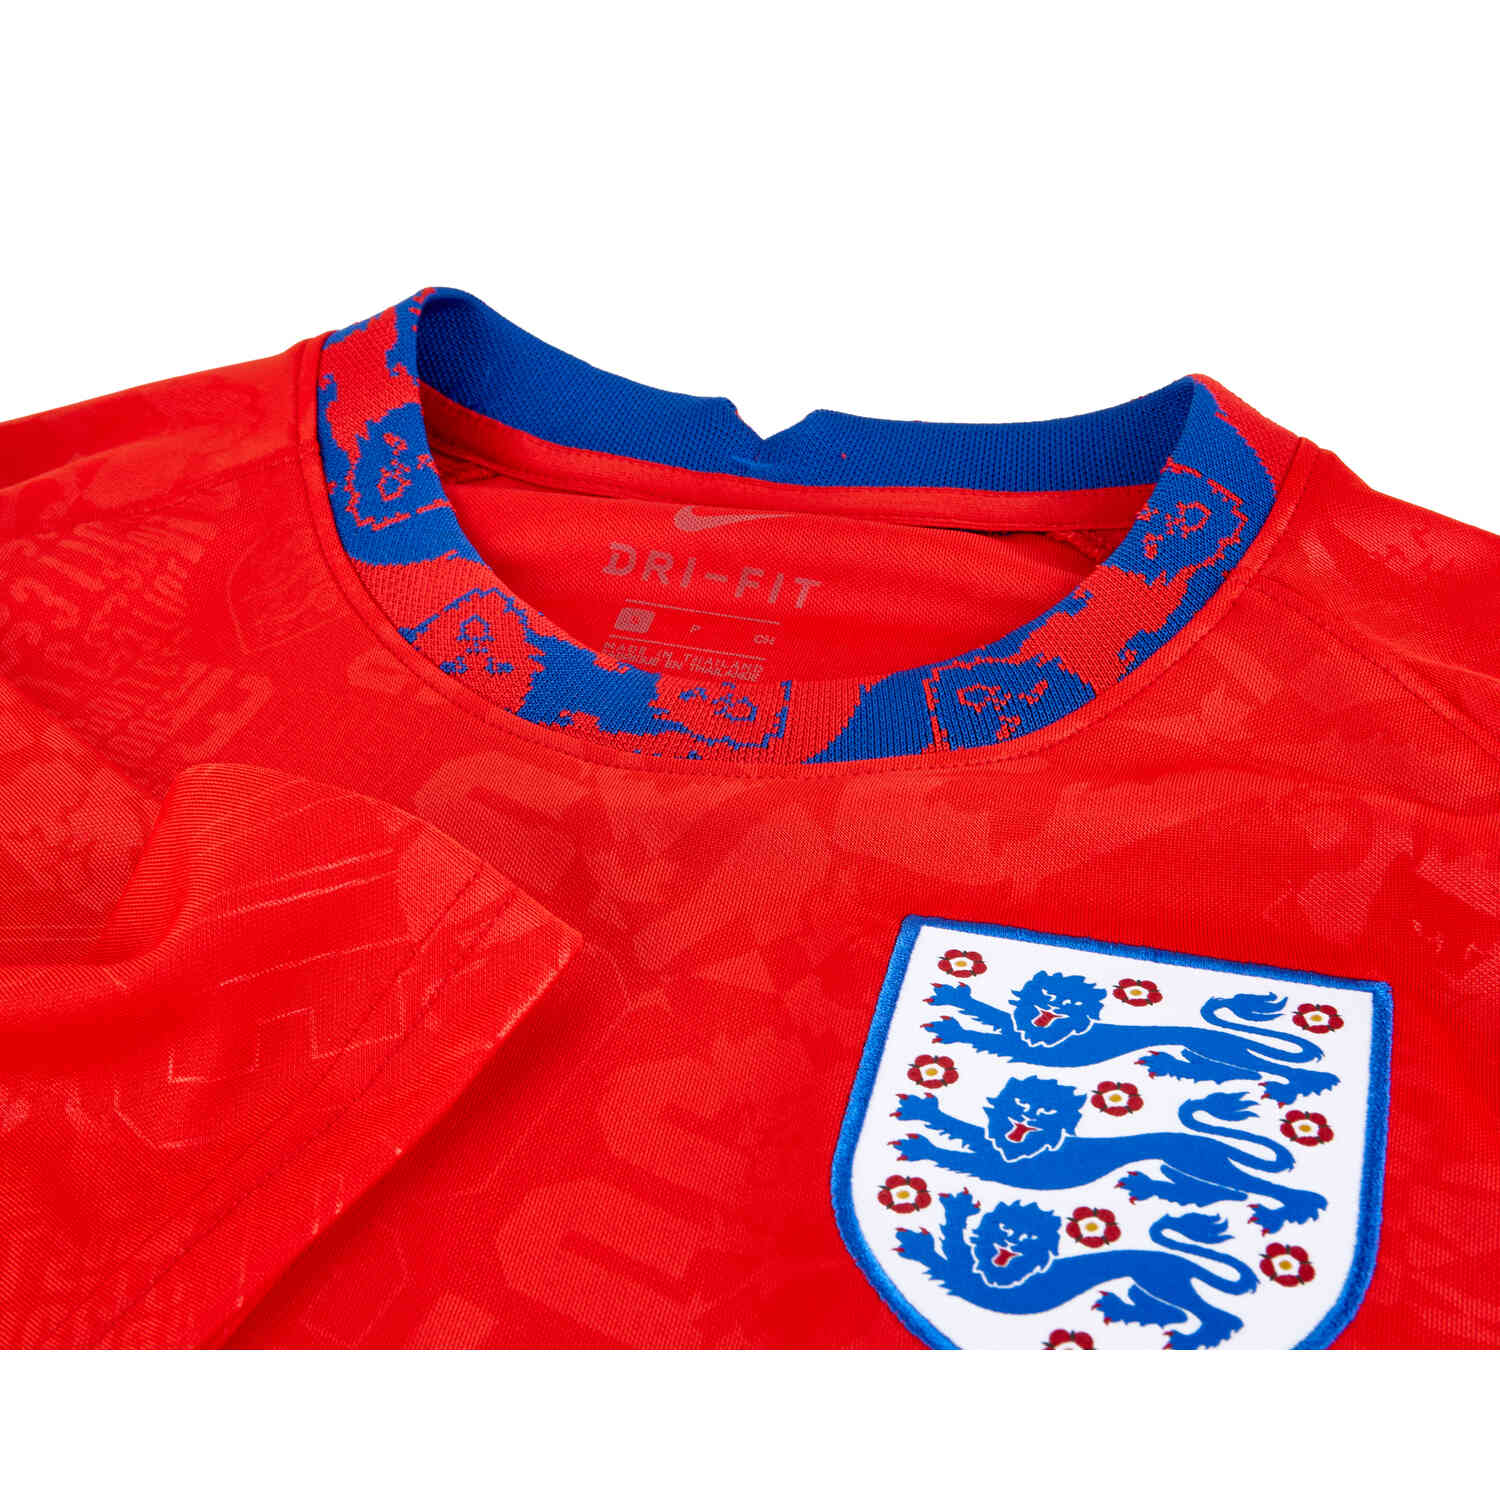 Nike England Pre-Match Top - Challenge Red & White - SoccerPro